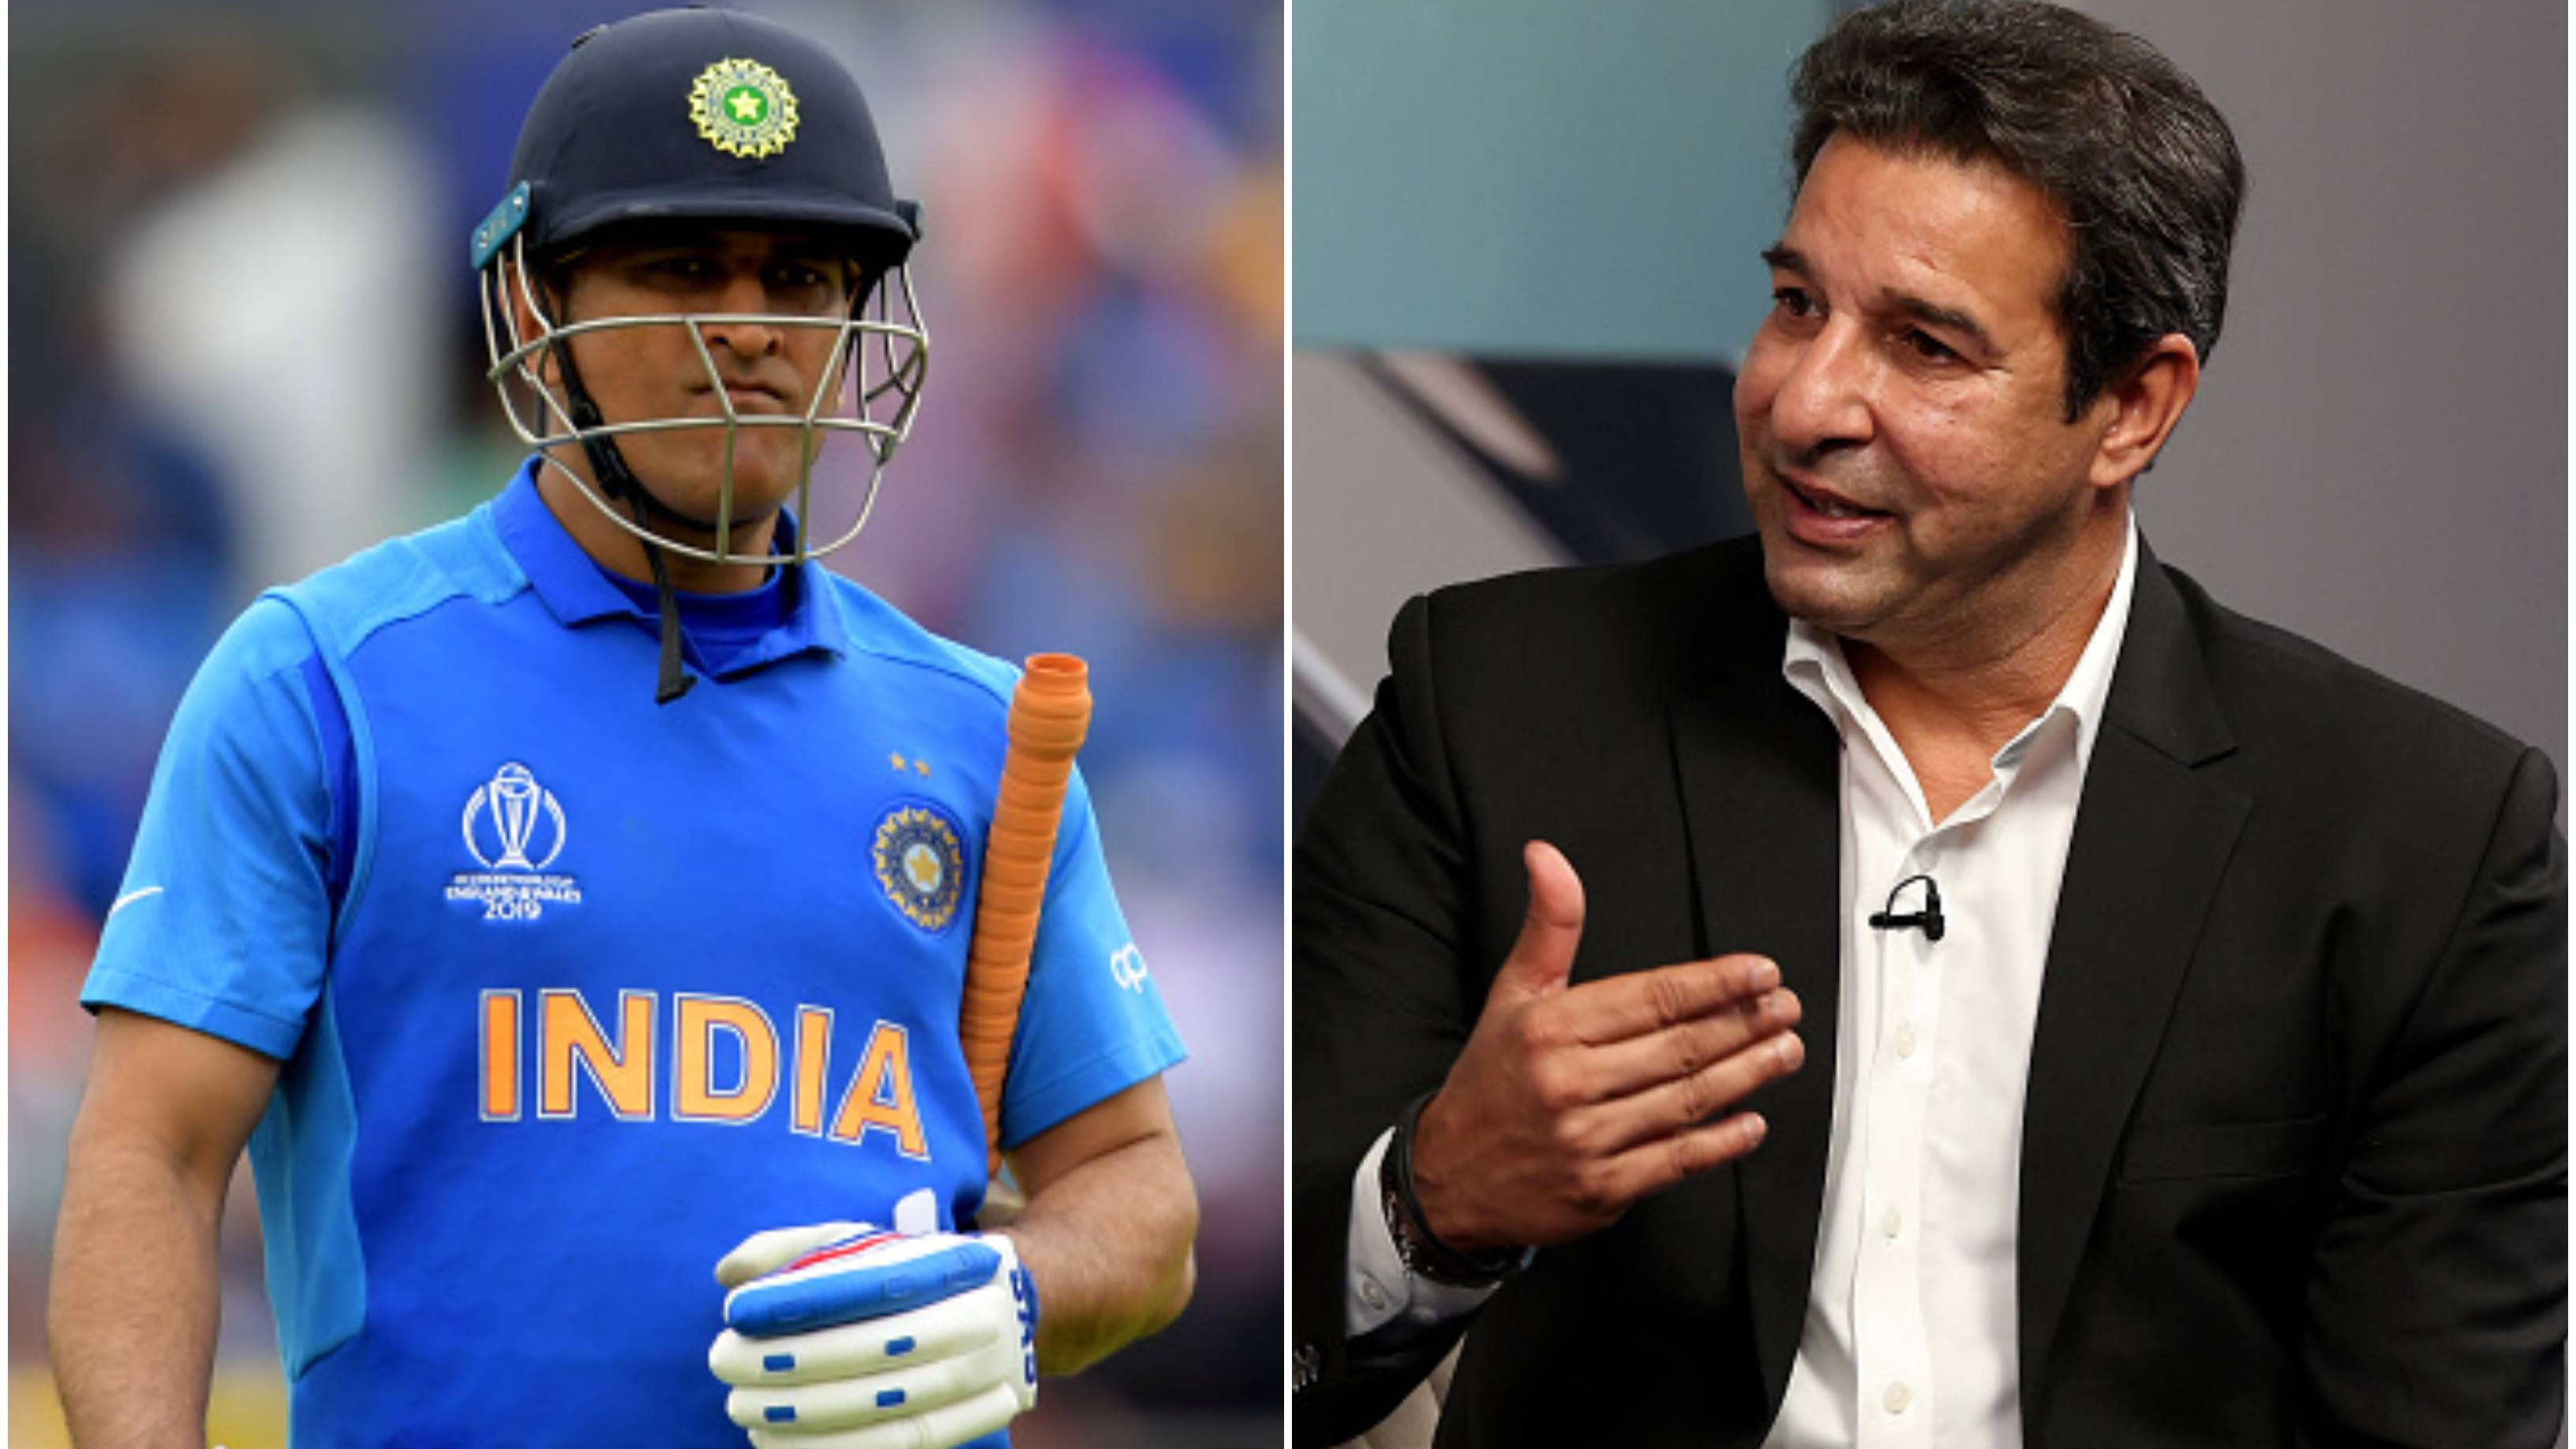 “He could have still played for India if he wanted to,” Wasim Akram on MS Dhoni